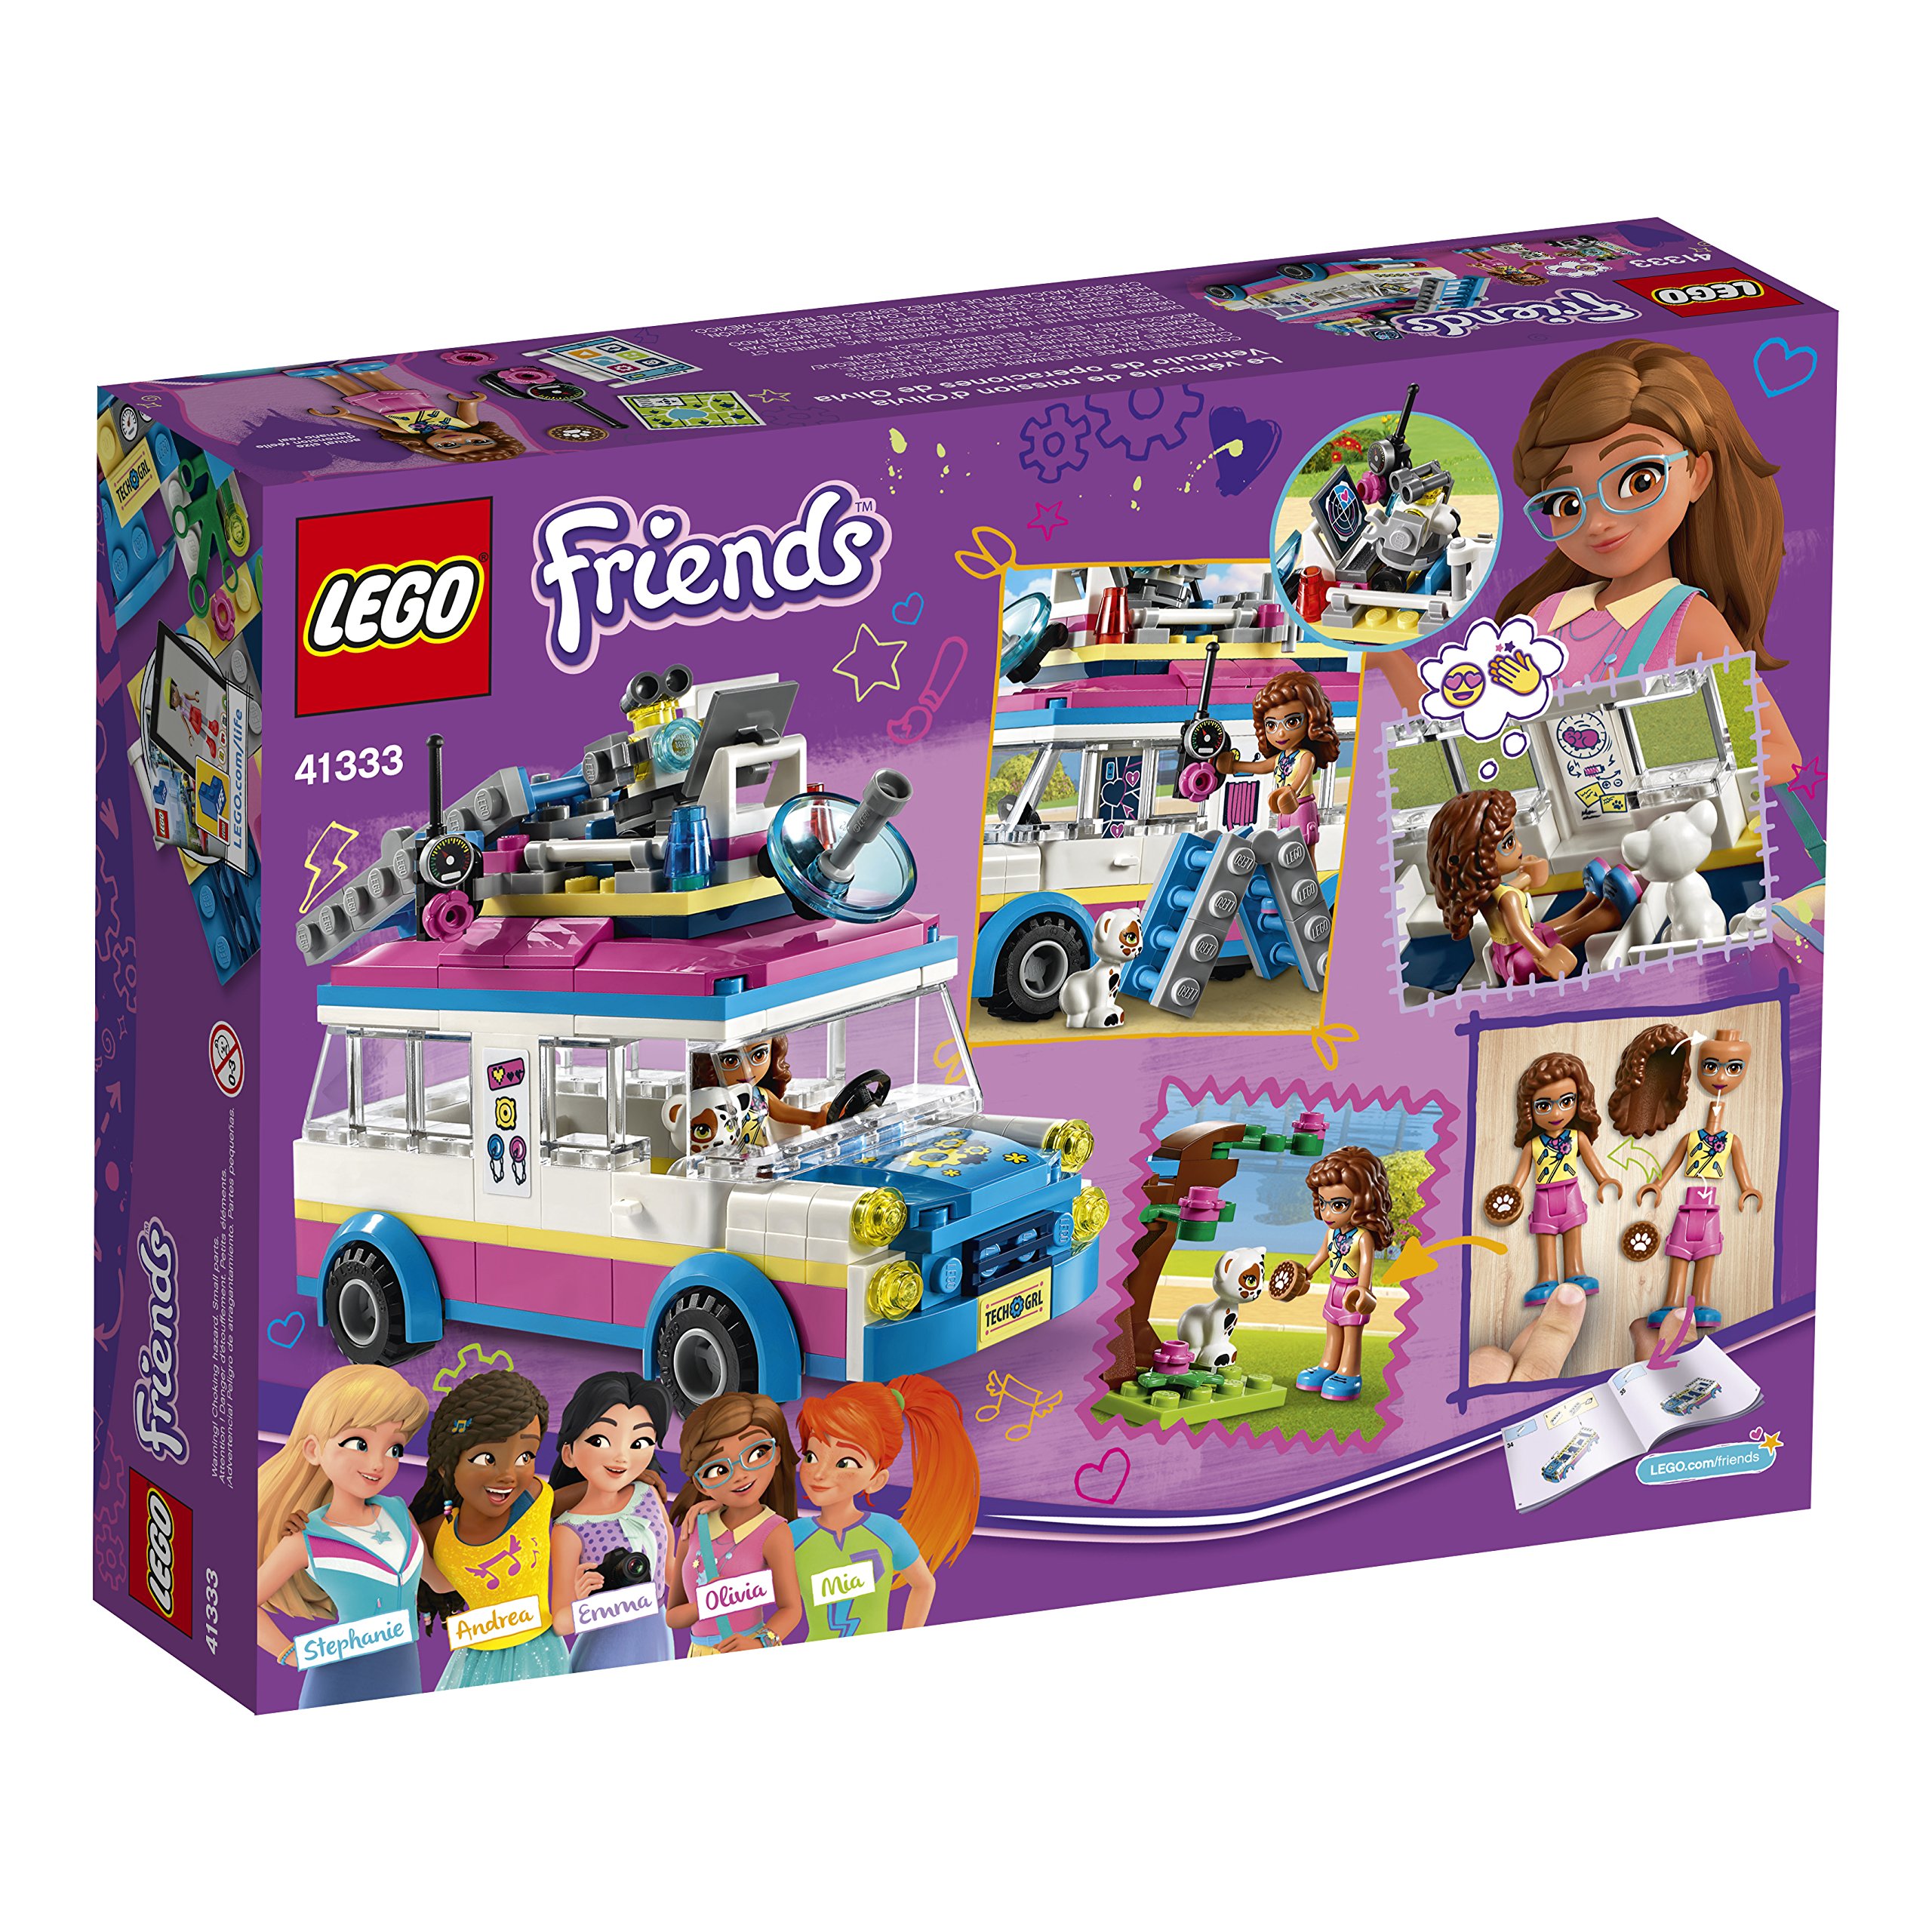 LEGO Friends Olivia’s Mission Vehicle 41333 Building Set (223 Pieces) (Discontinued by Manufacturer)